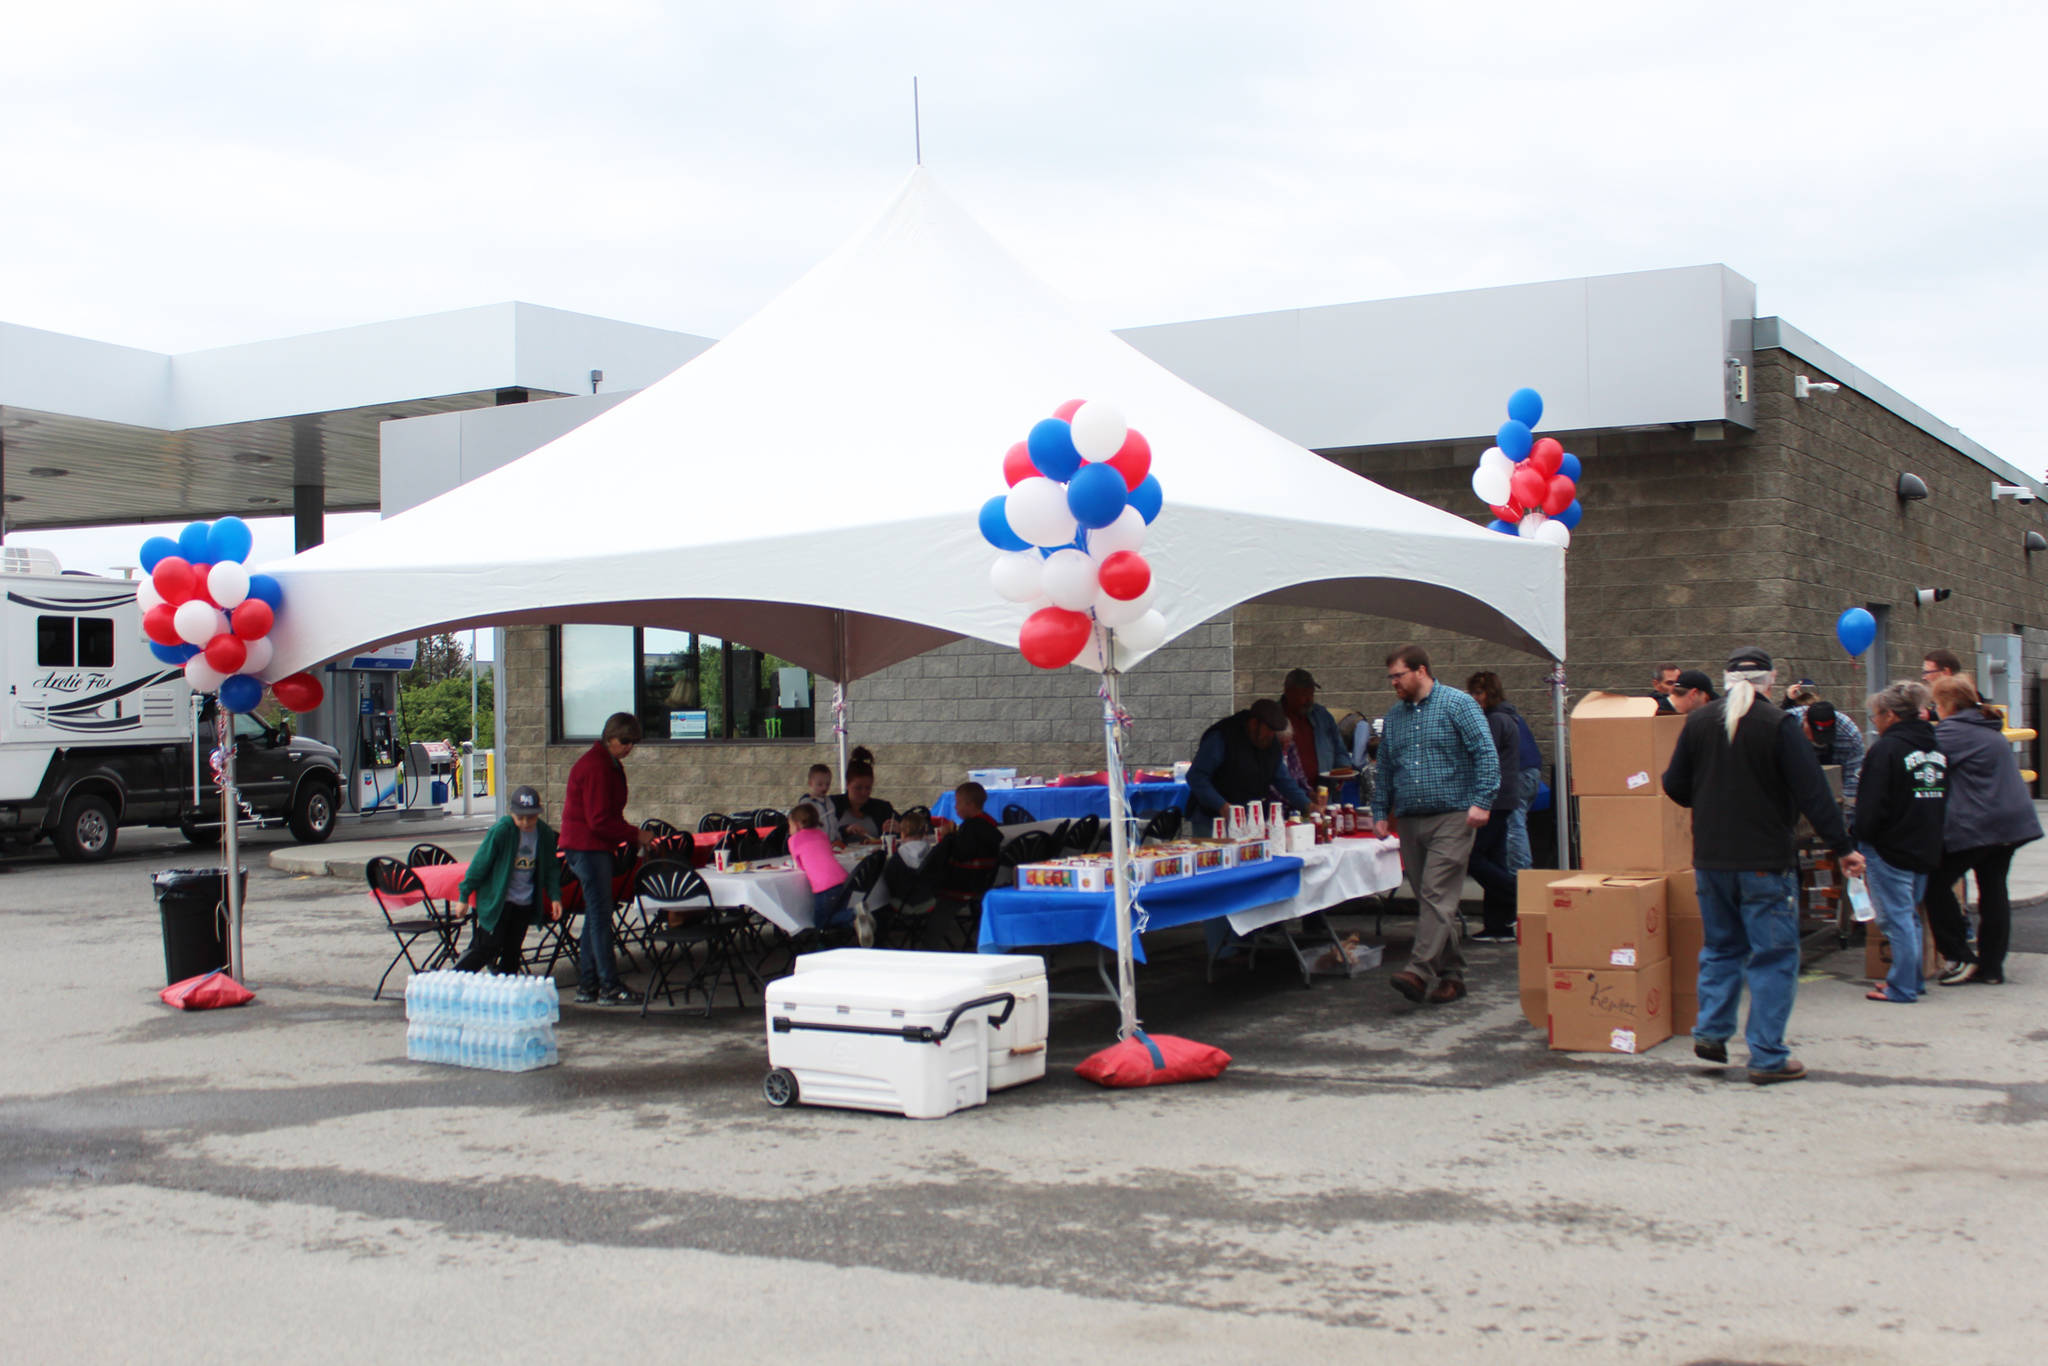 <span class="neFMT neFMT_PhotoCredit">Photo by Megan Pacer/Homer News</span>                                Community members enjoy free food during the grand opening of the Chevron gas station Saturday, June 23, 2018 on Homer Bypass Road in Homer, Alaska. In converting the Essential One station to Chevron, four new pumps were added to the property.